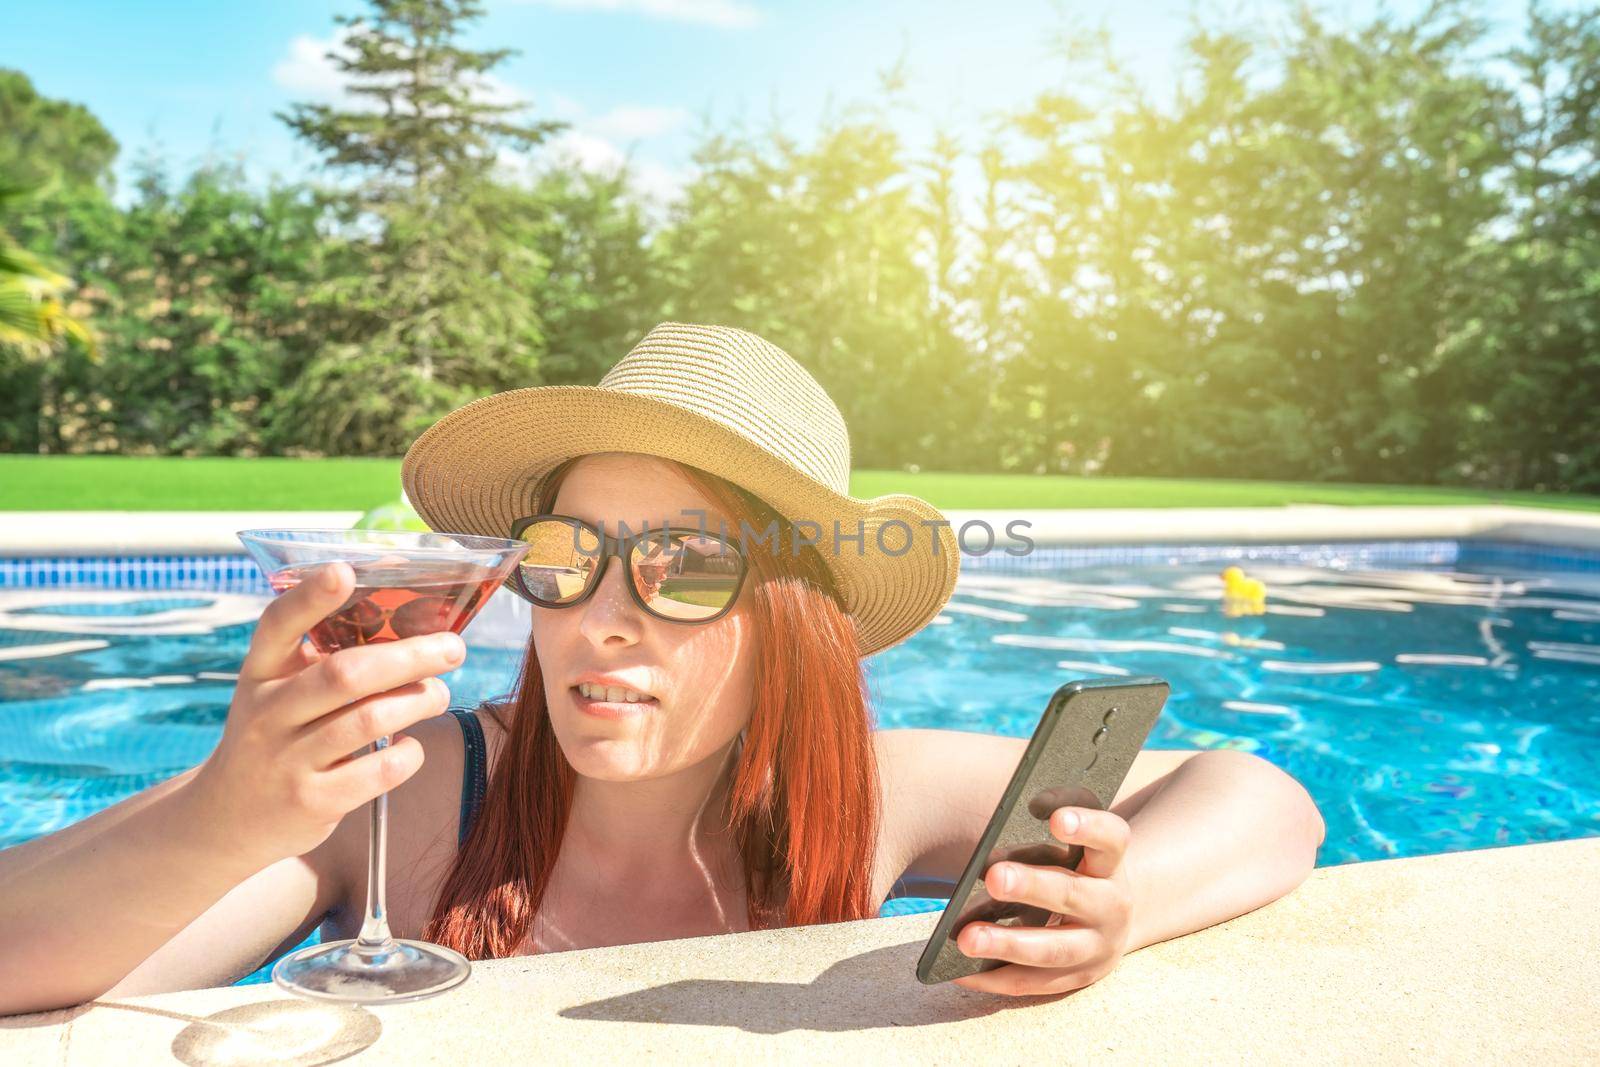 young woman relaxing inside the pool, looking at her mobile phone. girl on holiday sharing the moments on her social networks. concept of summer and free time. outdoor garden, natural sunlight.